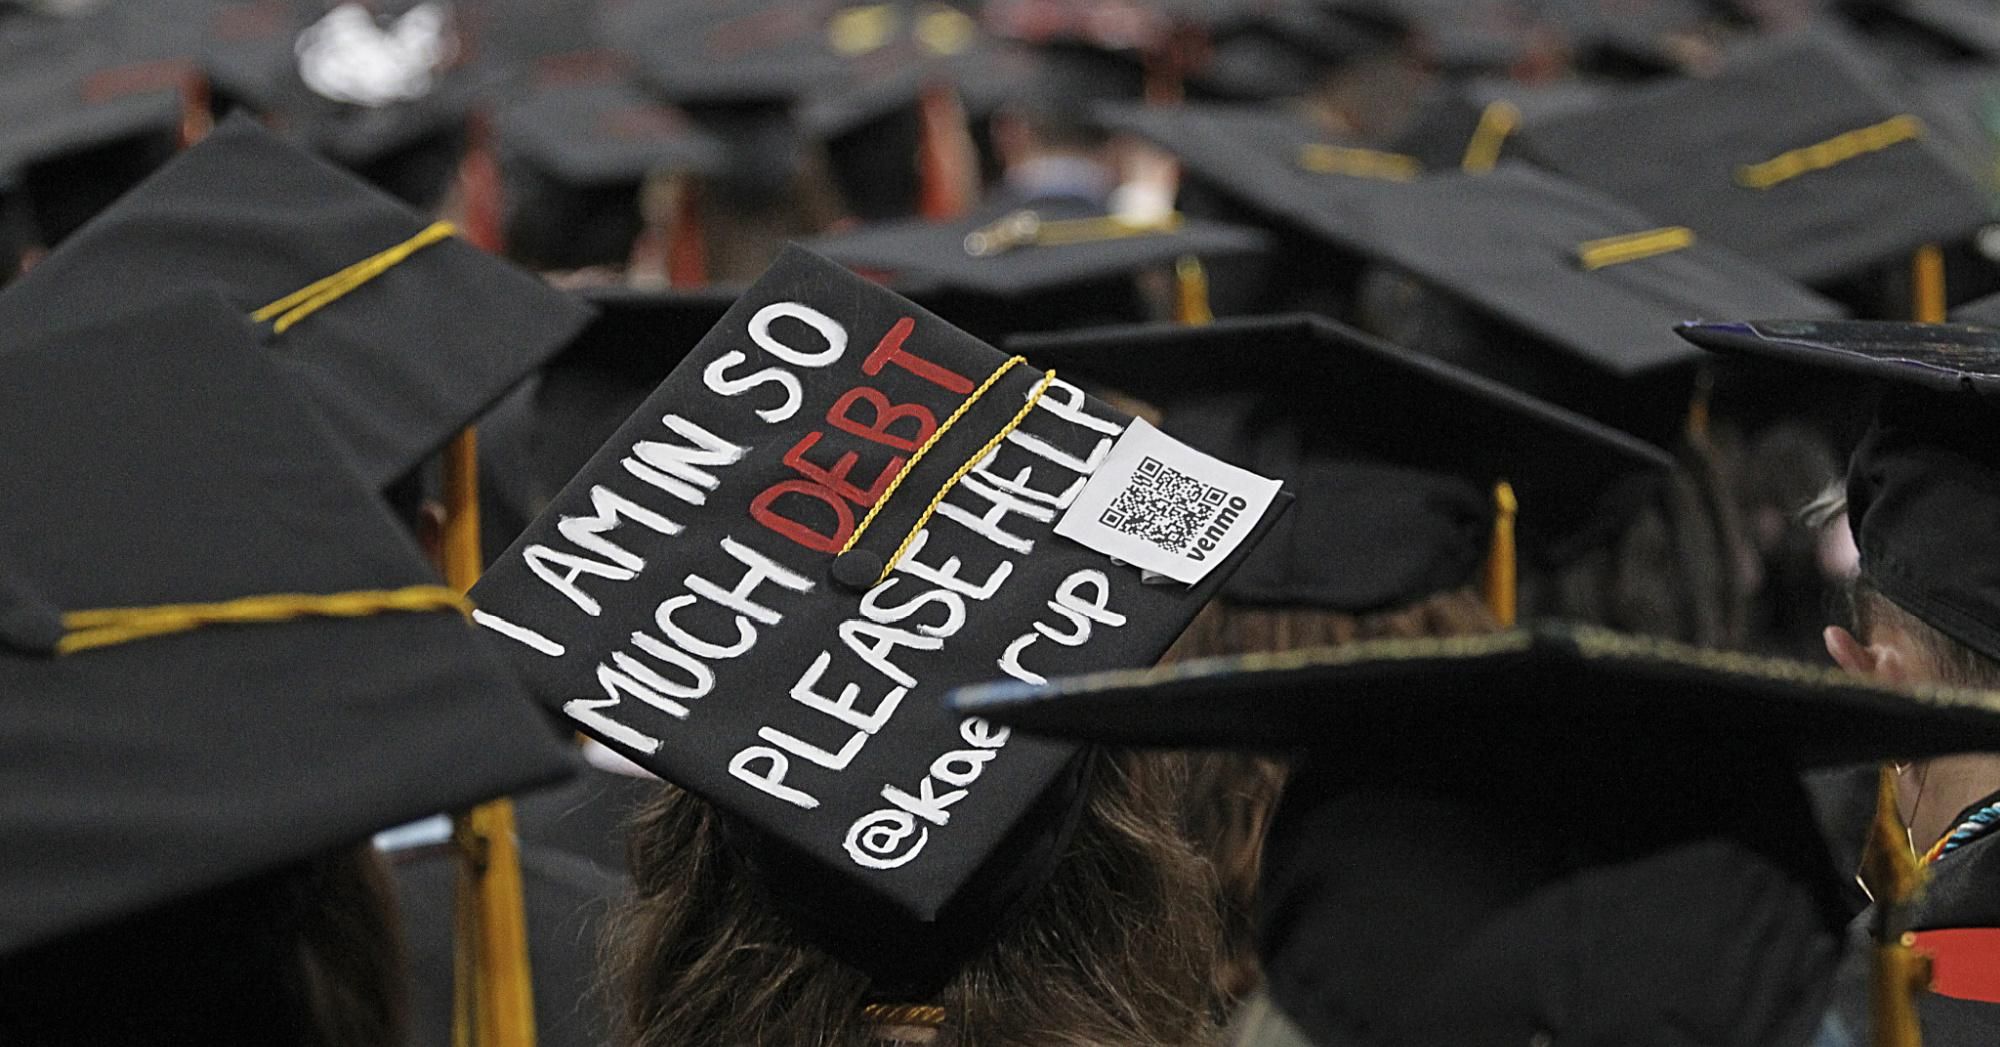 The reality of college tuition debt was on display at the Northeastern University graduation at the TD Garden on May 03, 2019.